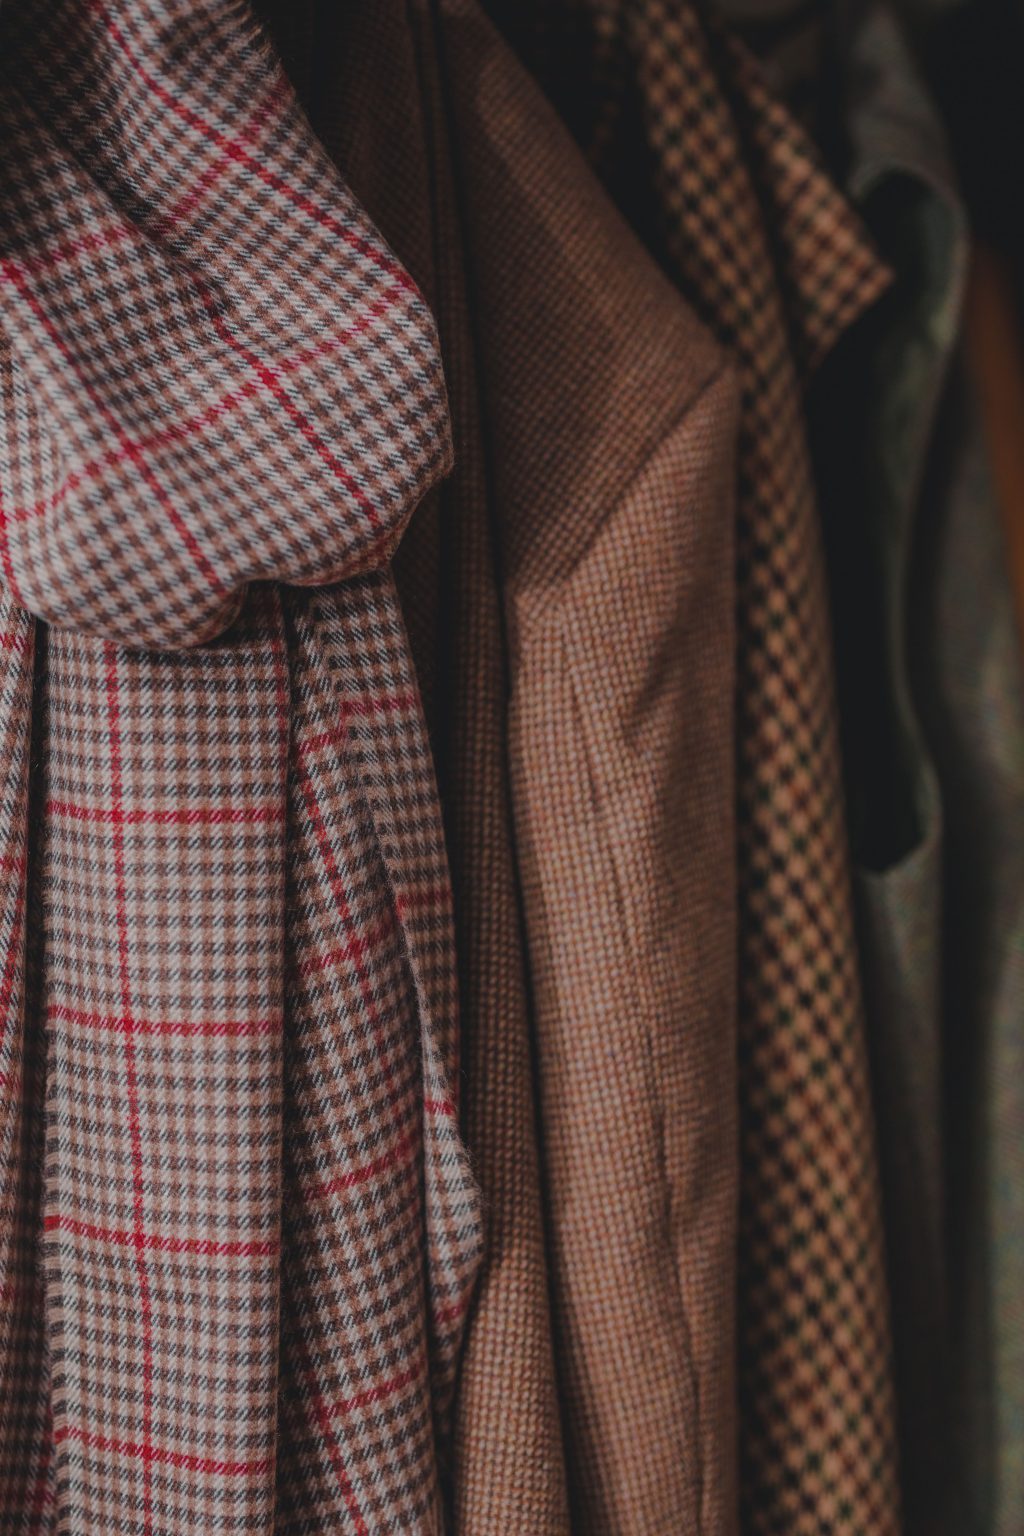 Exclusive 100% Scottish Cashmere Scarves - Lovat Mill is the Home of Tweed